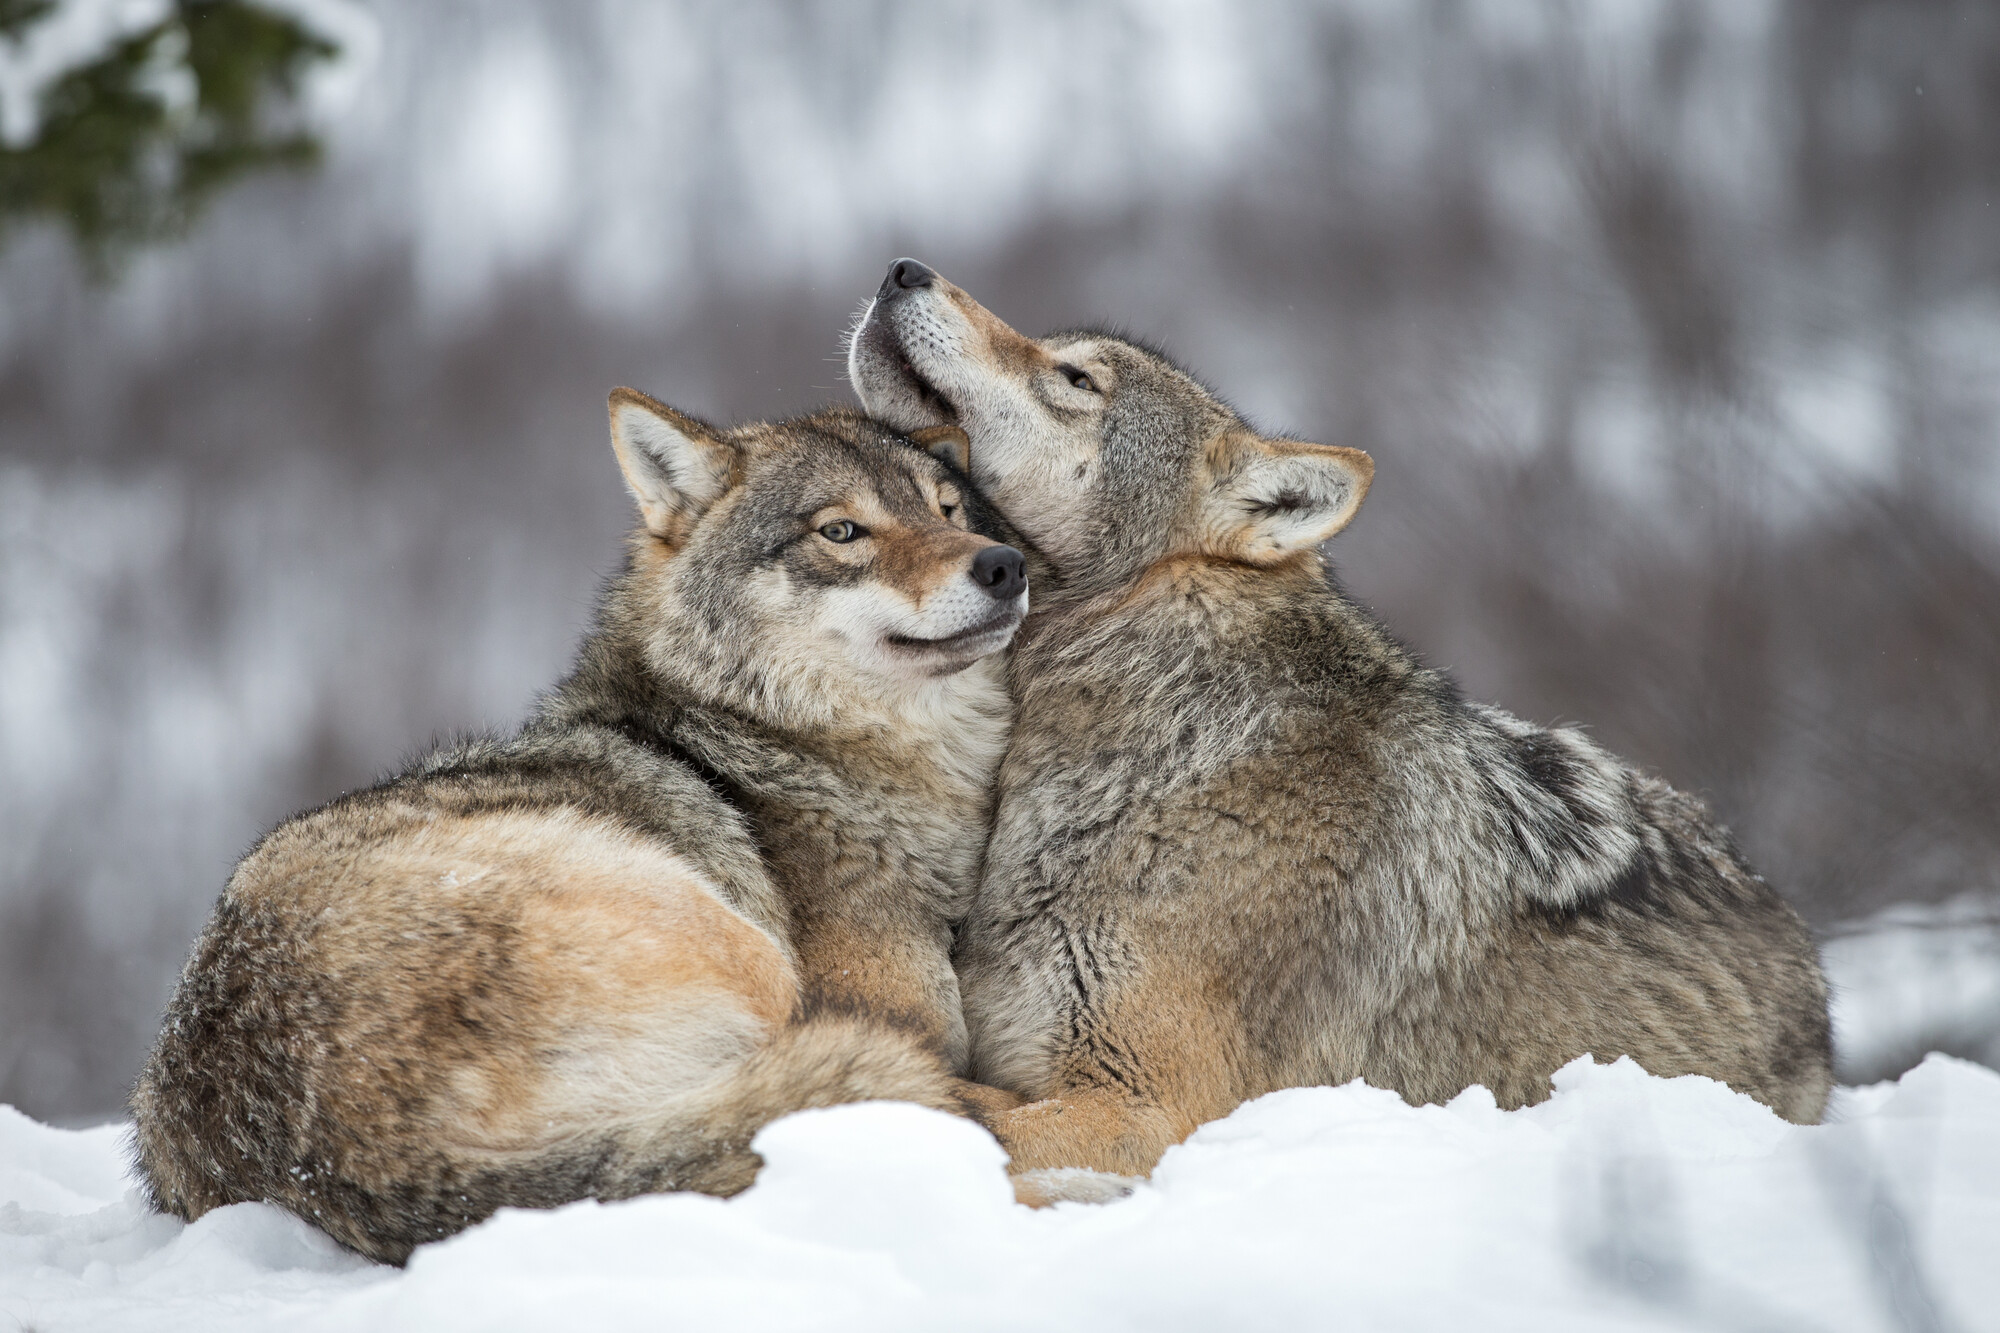 Eurasian wolves are keystone predators in Europe, helping to maintain healthy balance in ecosystems.